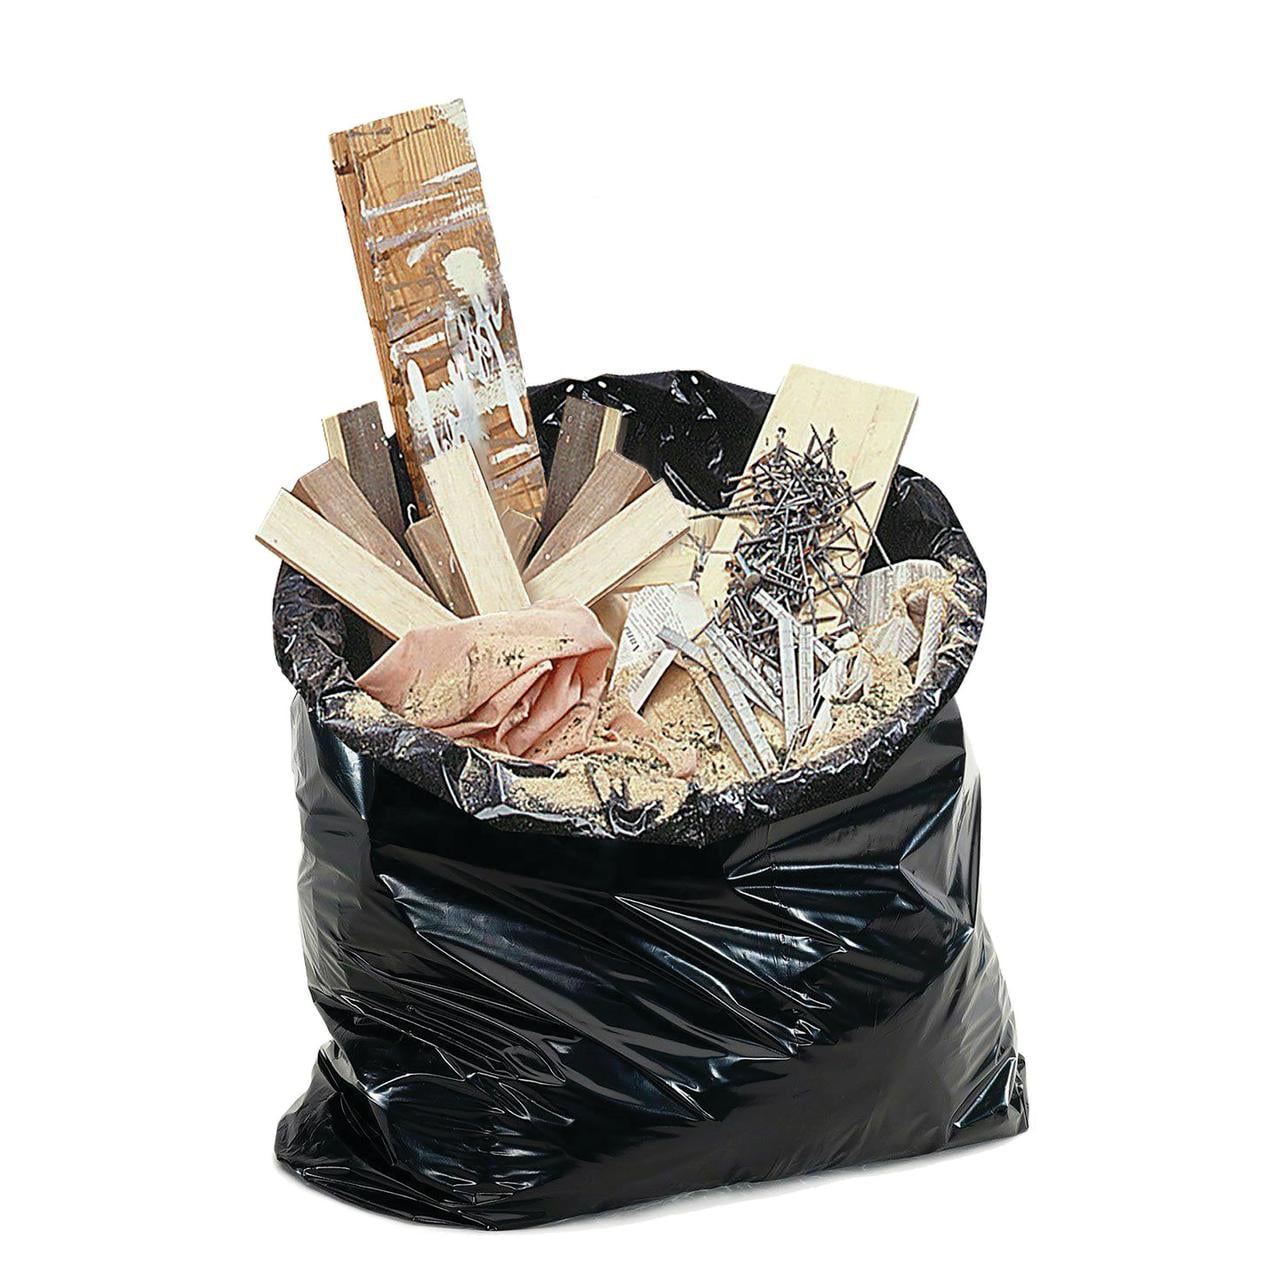 12-16 Gallon 0.65 MIL Black Garbage Bags - 24 x 31 - Pack of 500 - For  Contractor, Janitorial, & Industrial